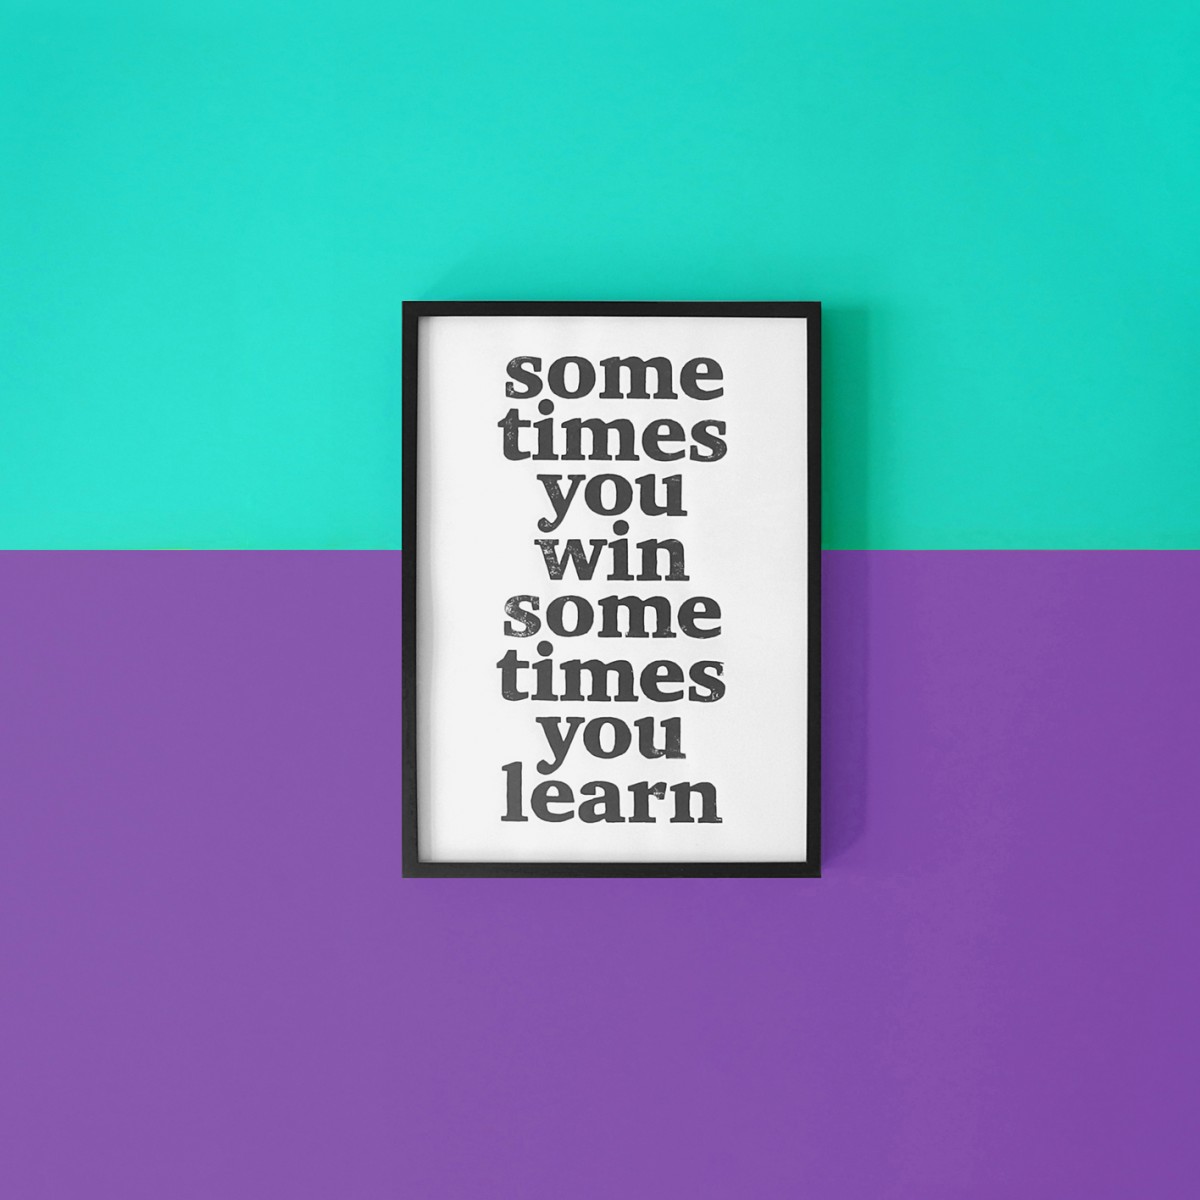 The True Type Linoldruck »sometimes you win, sometimes you learn«, gerahmt (DIN A4), Poster, Print, Typografie, Design